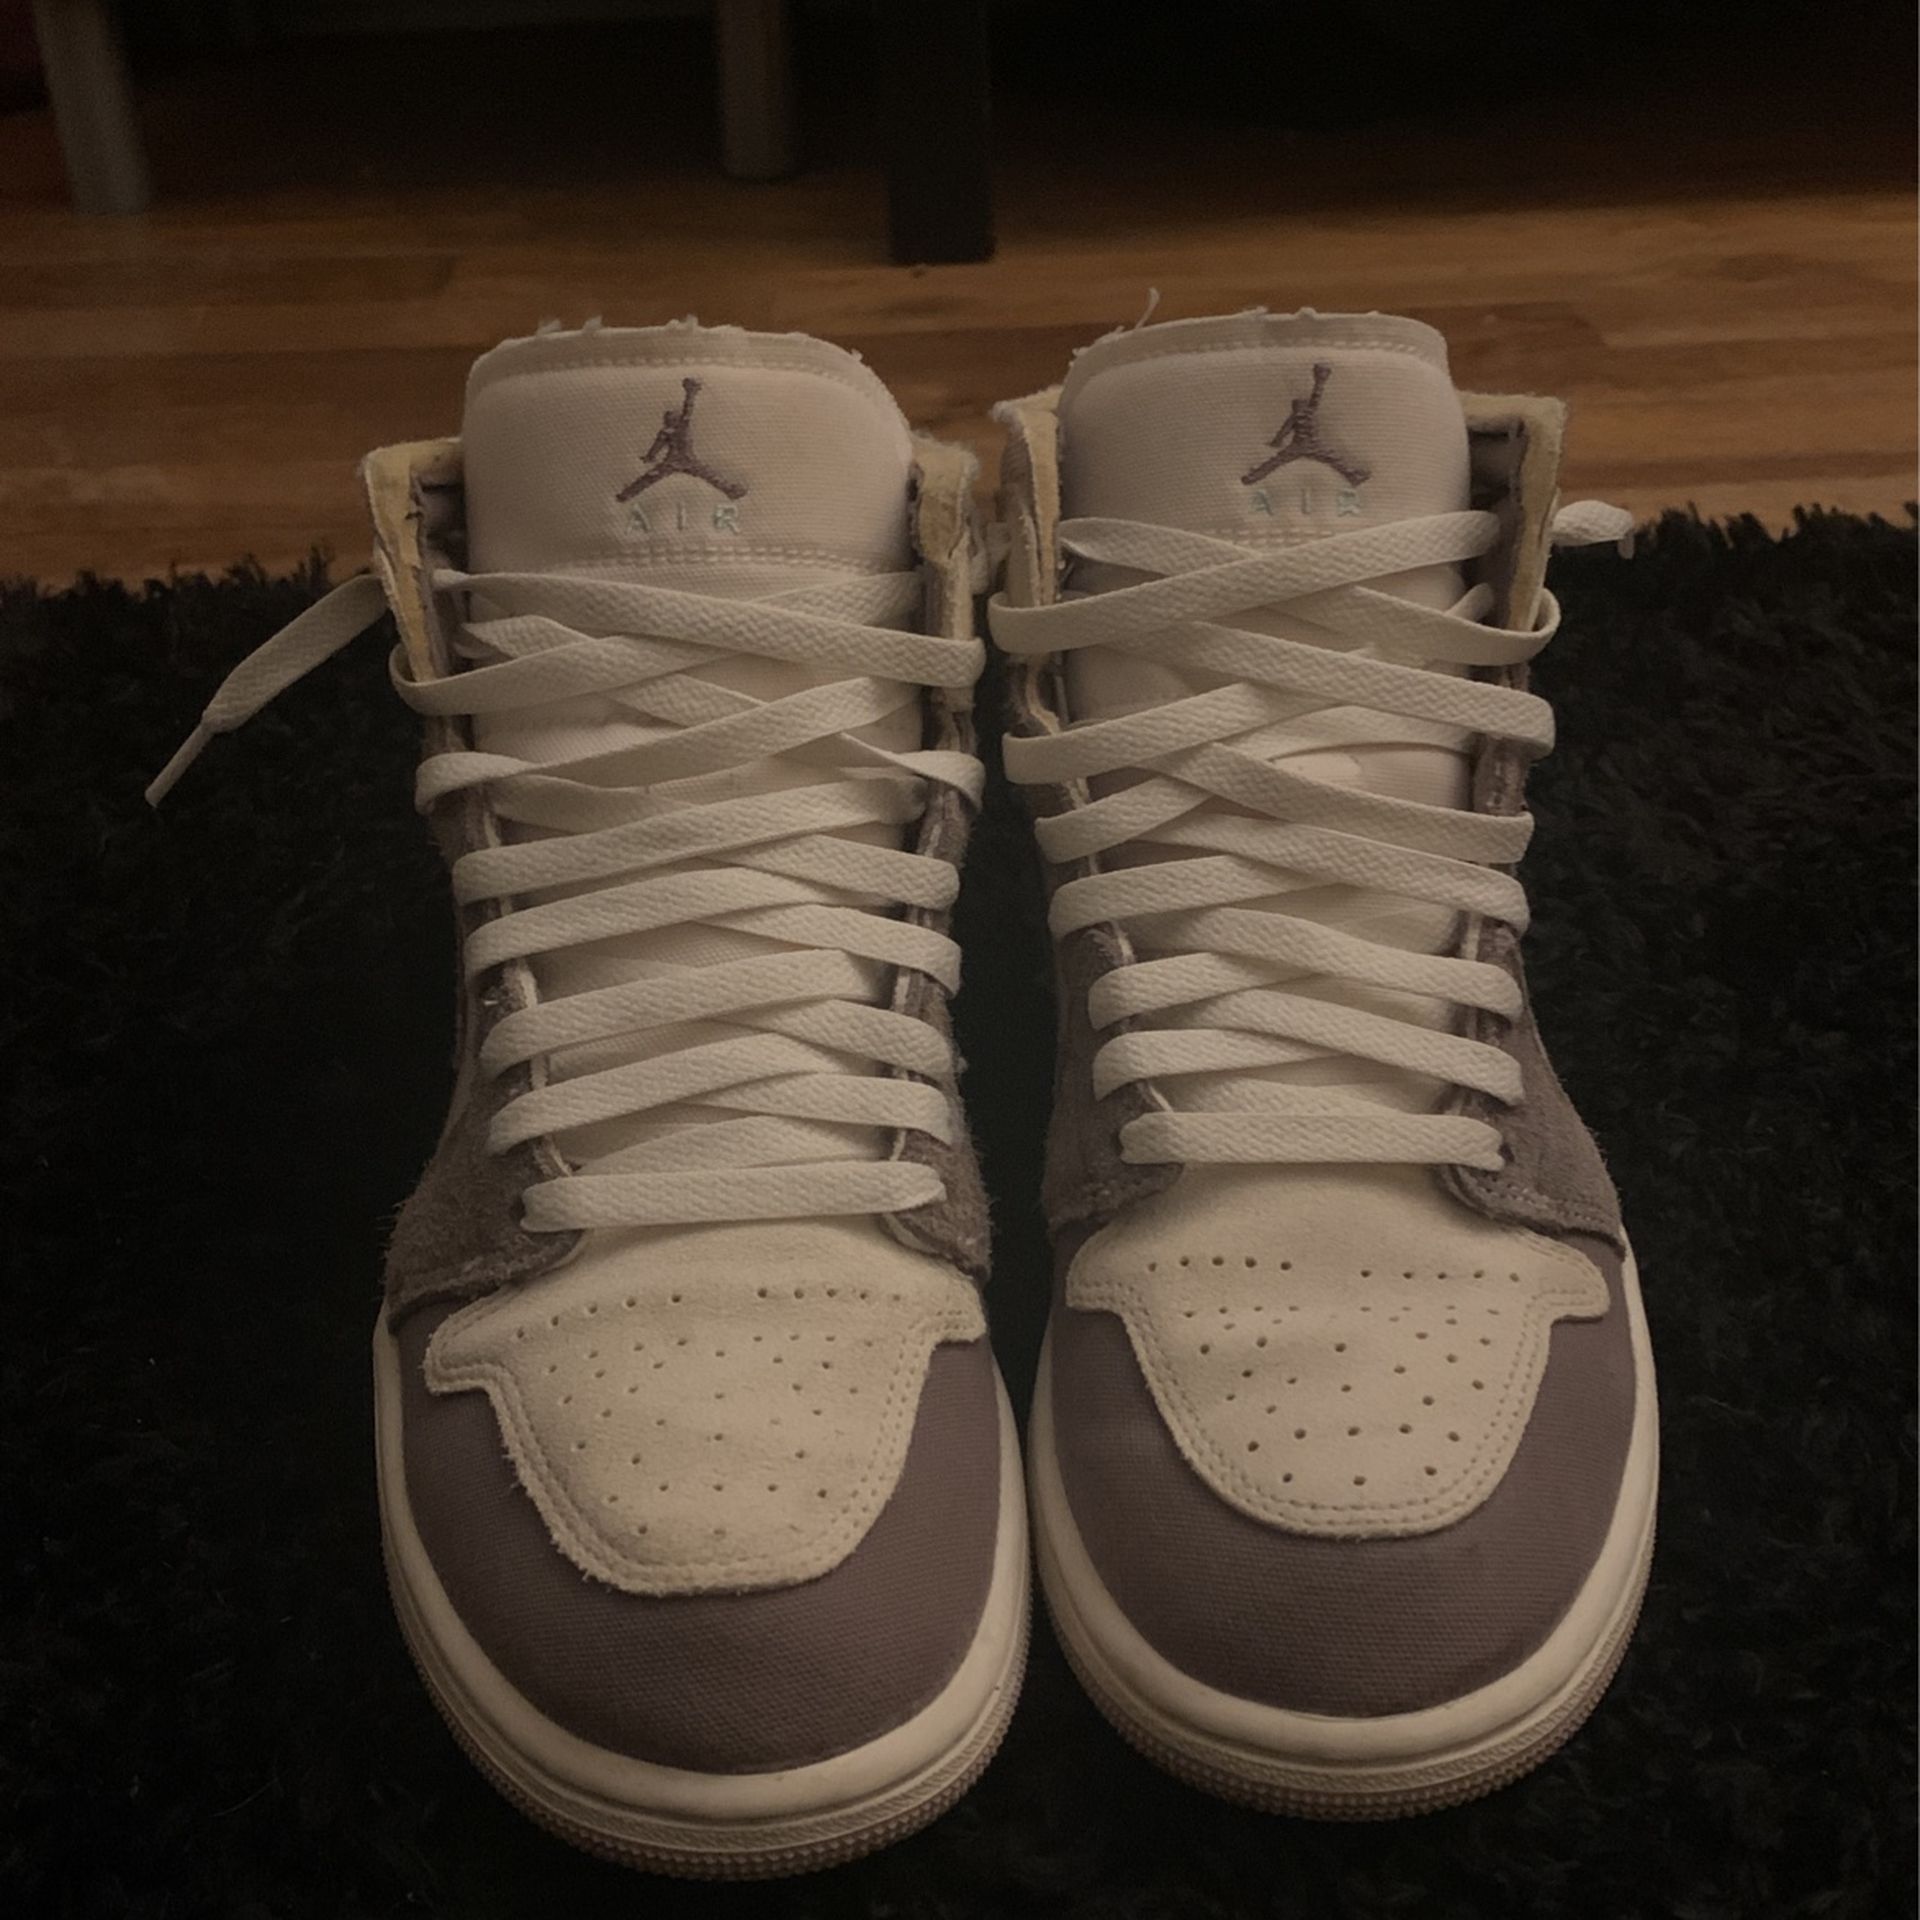 Air Jordan 1 Mid SE Craft I’ll Clean the Shoe When You Buy